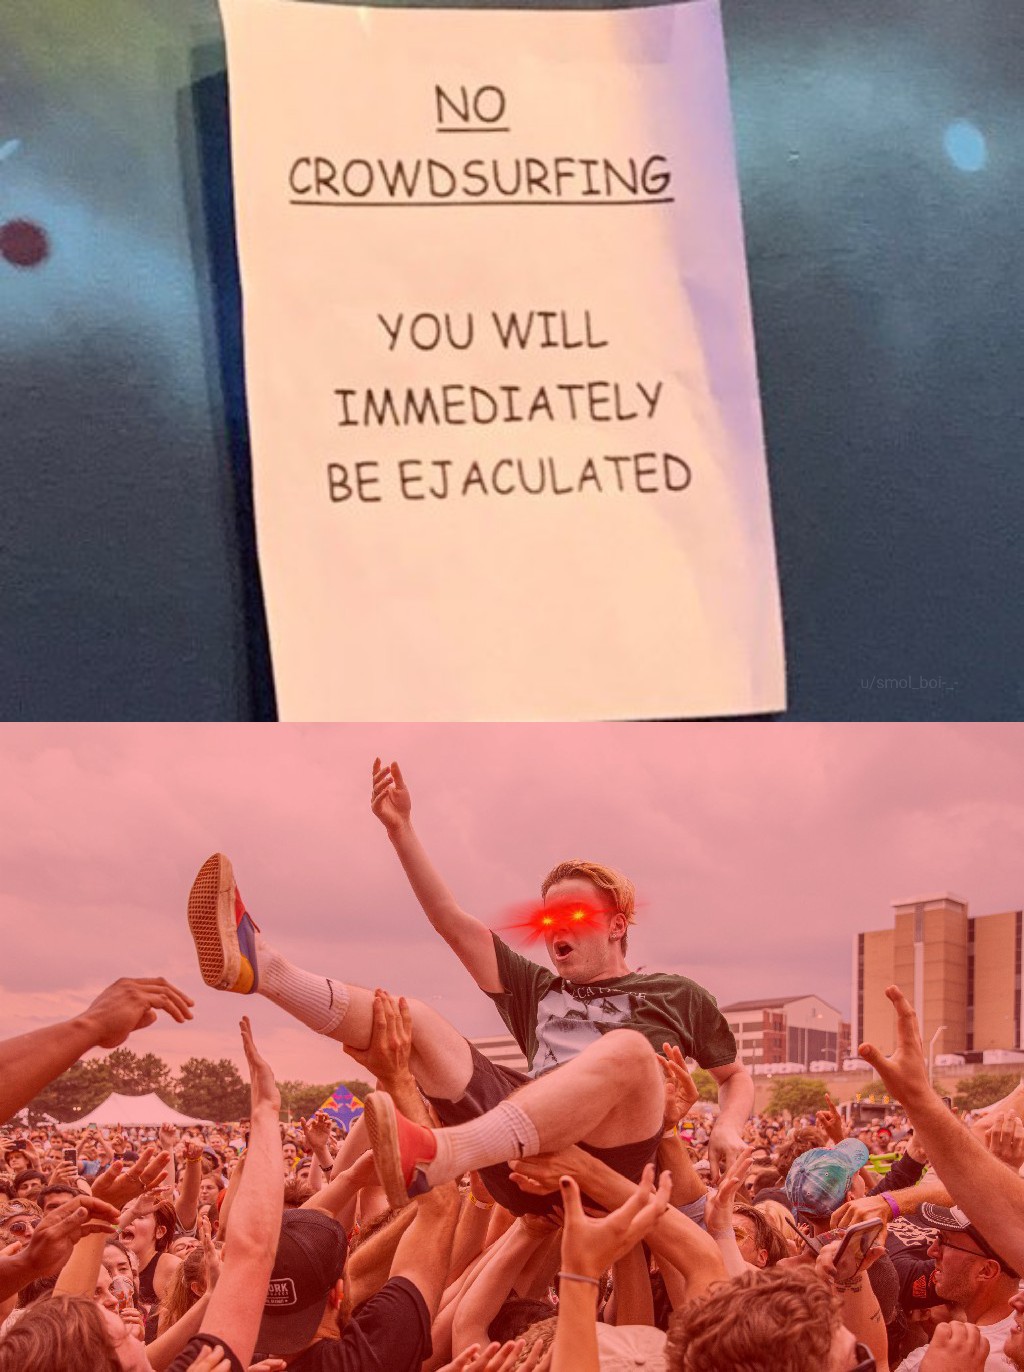 dank memes - poster - Ork T No Crowdsurfing You Will Immediately Be Ejaculated 144 usmol_boi_